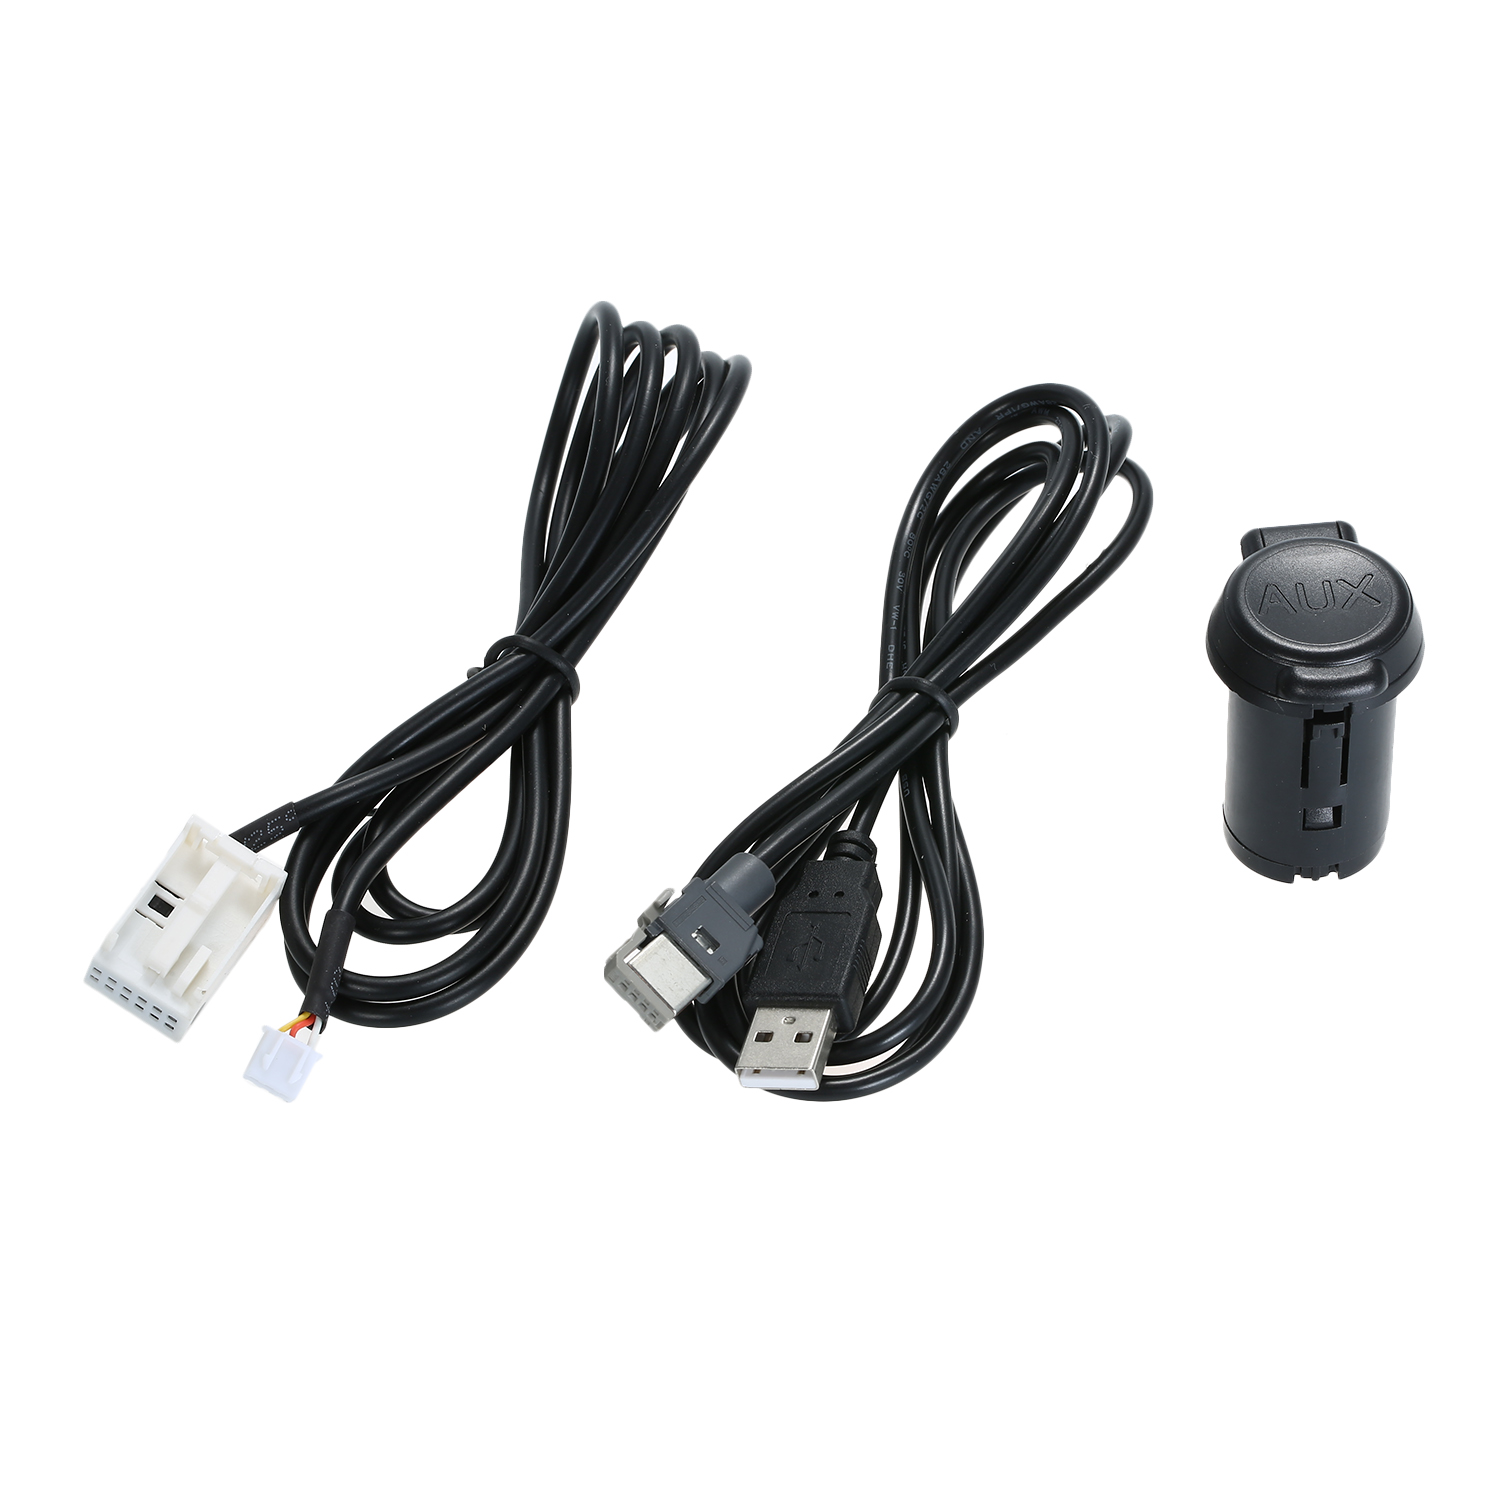  Car Stereo Male USB AUX Cable Set For Peugeot 